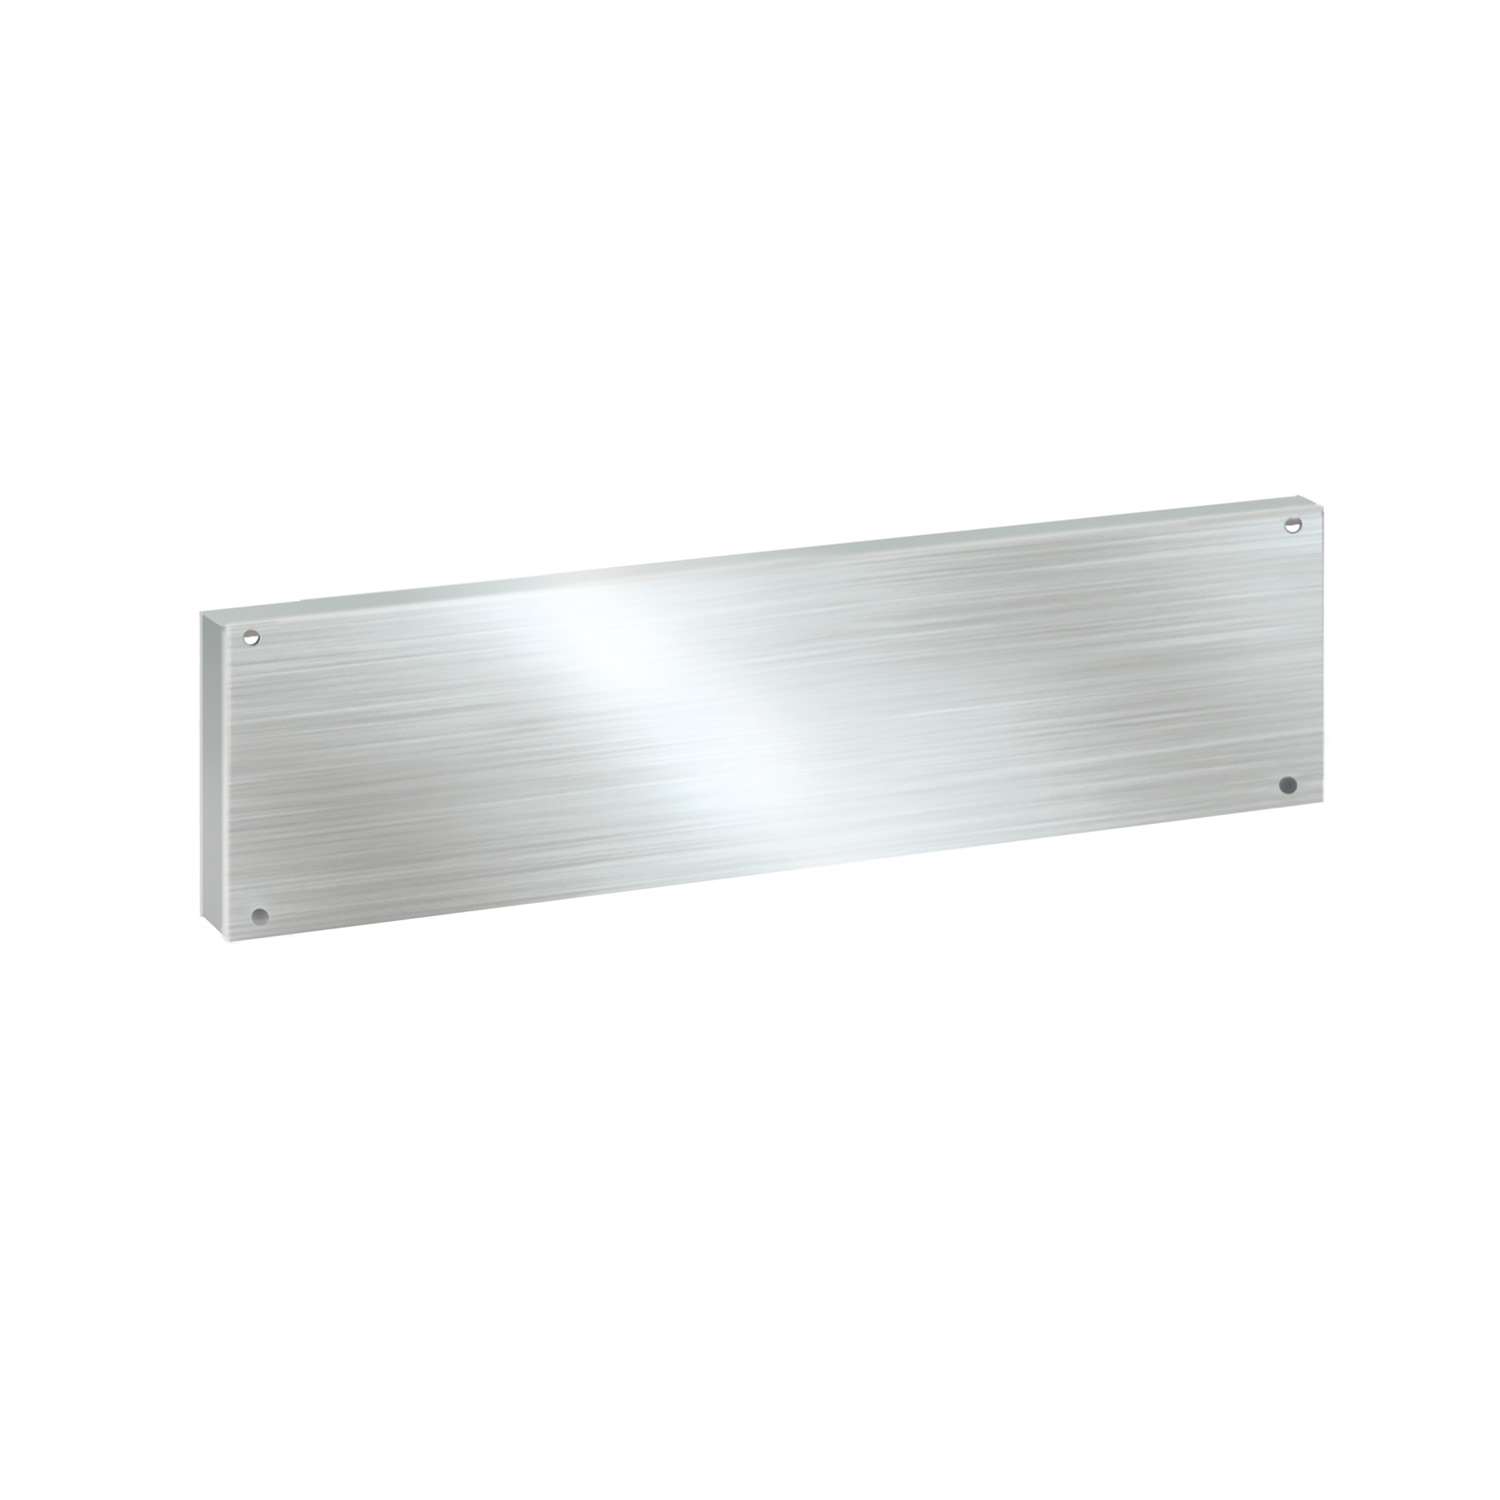 Stainless steel back panel (160 x 600mm)